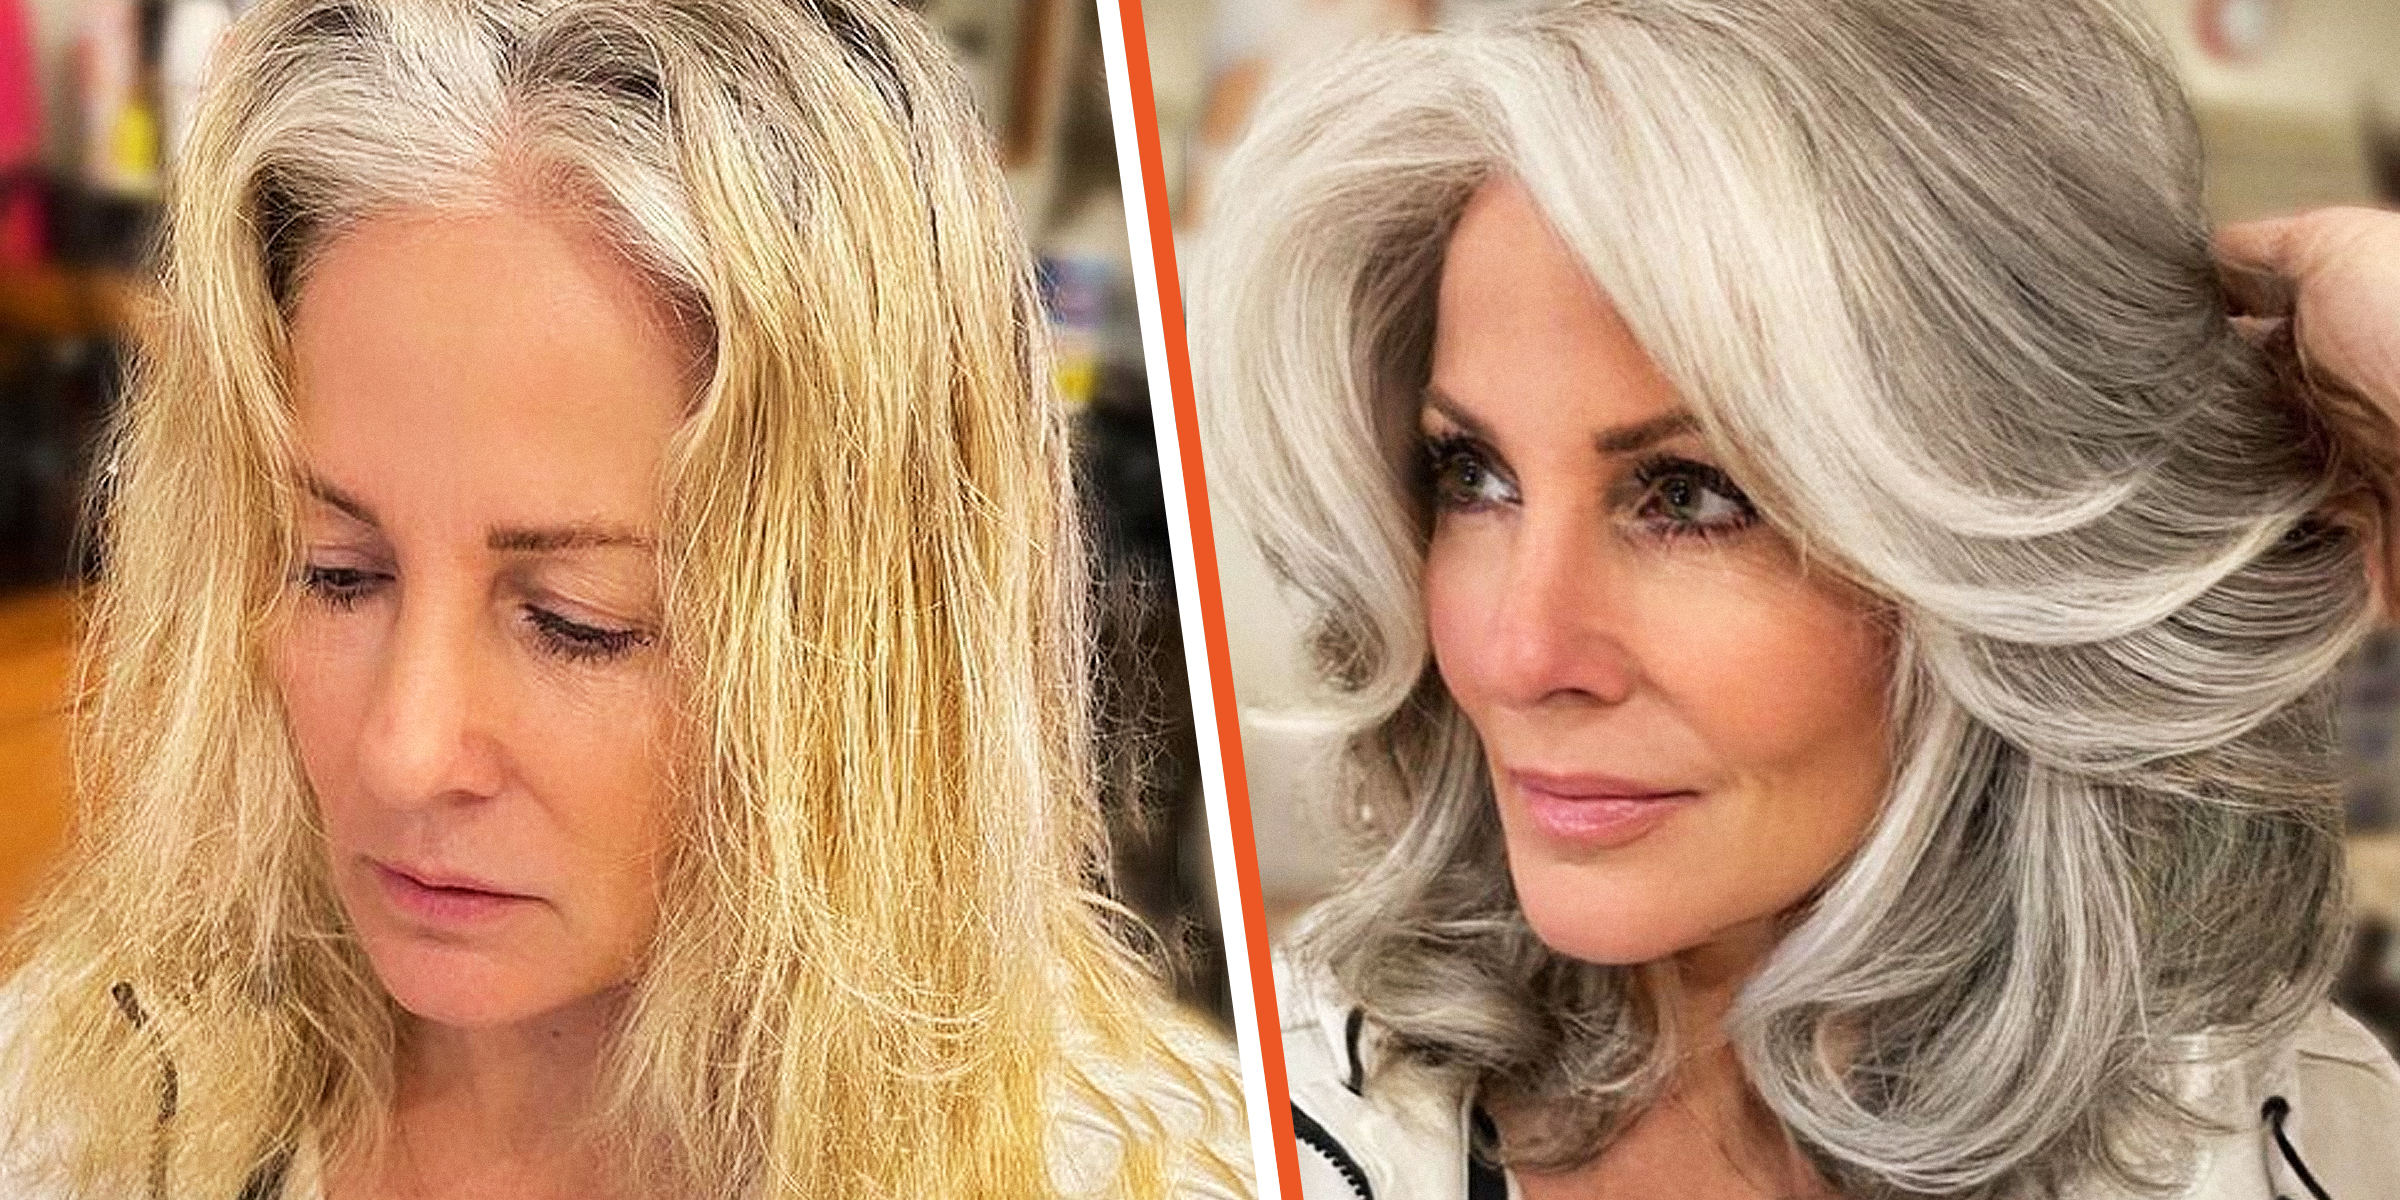 A mature woman before and after hair transformation | Source: instagram.com/jackmartincolorist